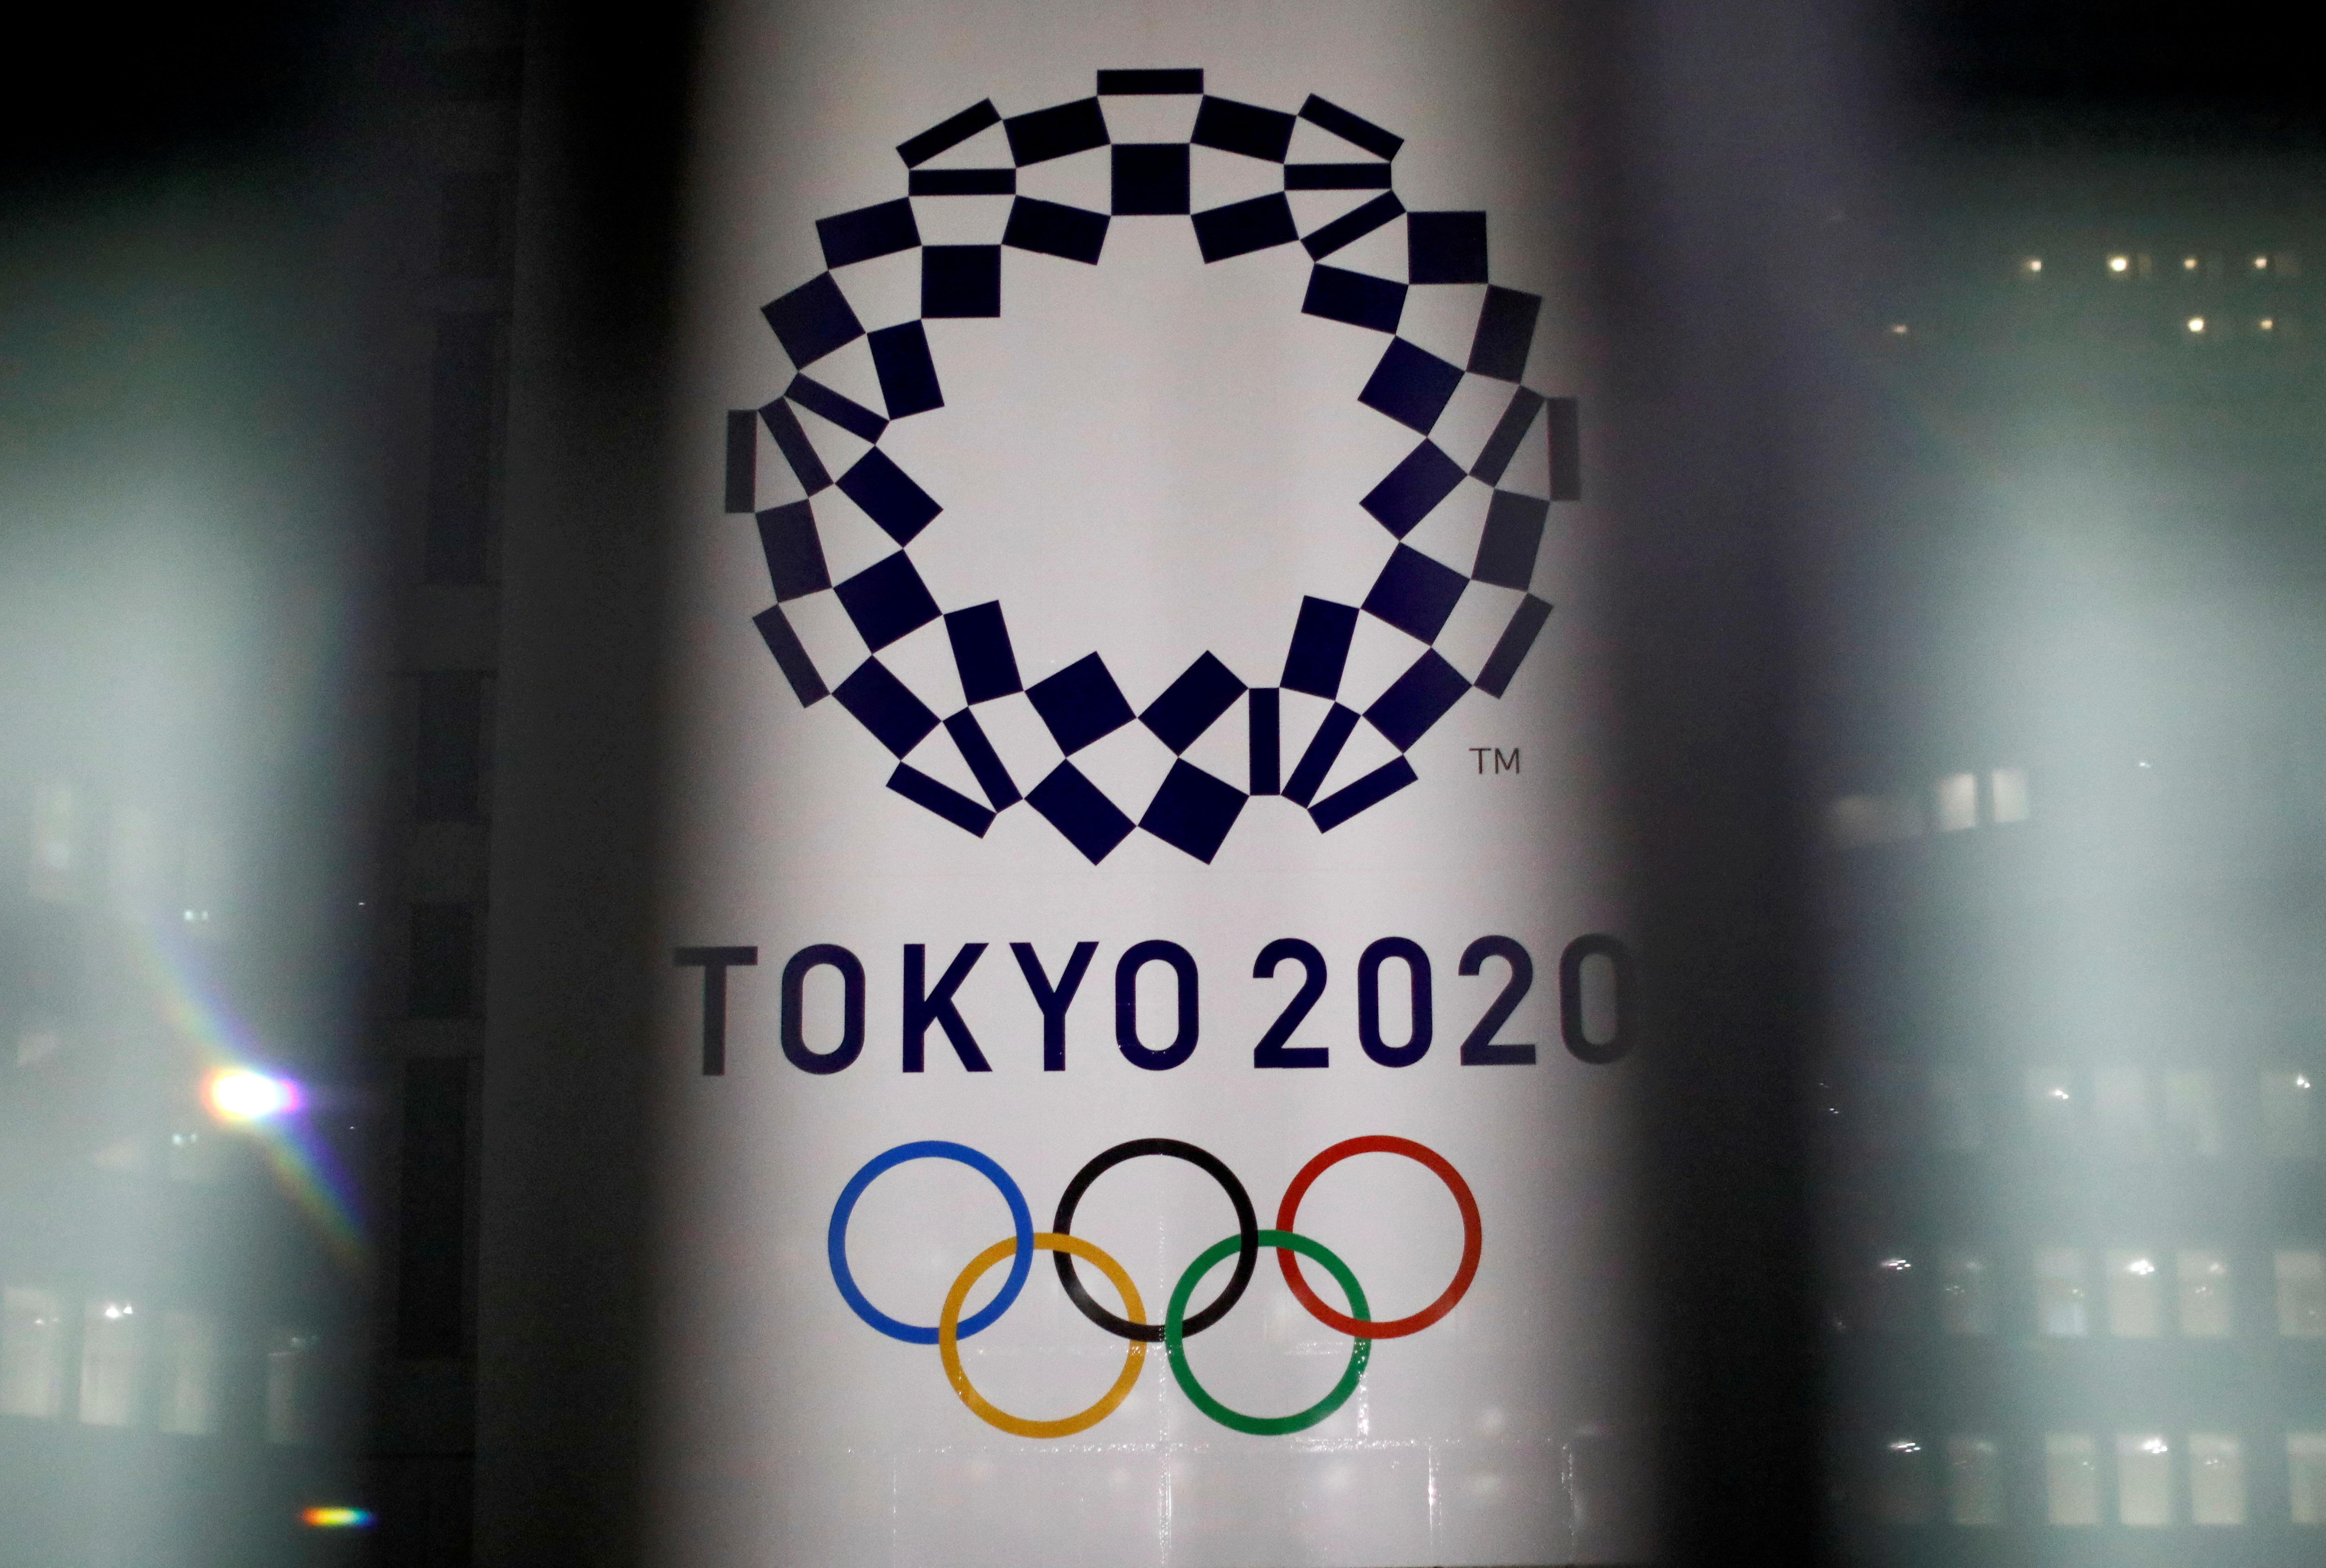 The logo of the Tokyo Olympic Games, at the Tokyo Metropolitan Government Office building in Tokyo, Japan, January 22, 2021. REUTERS/Issei Kato